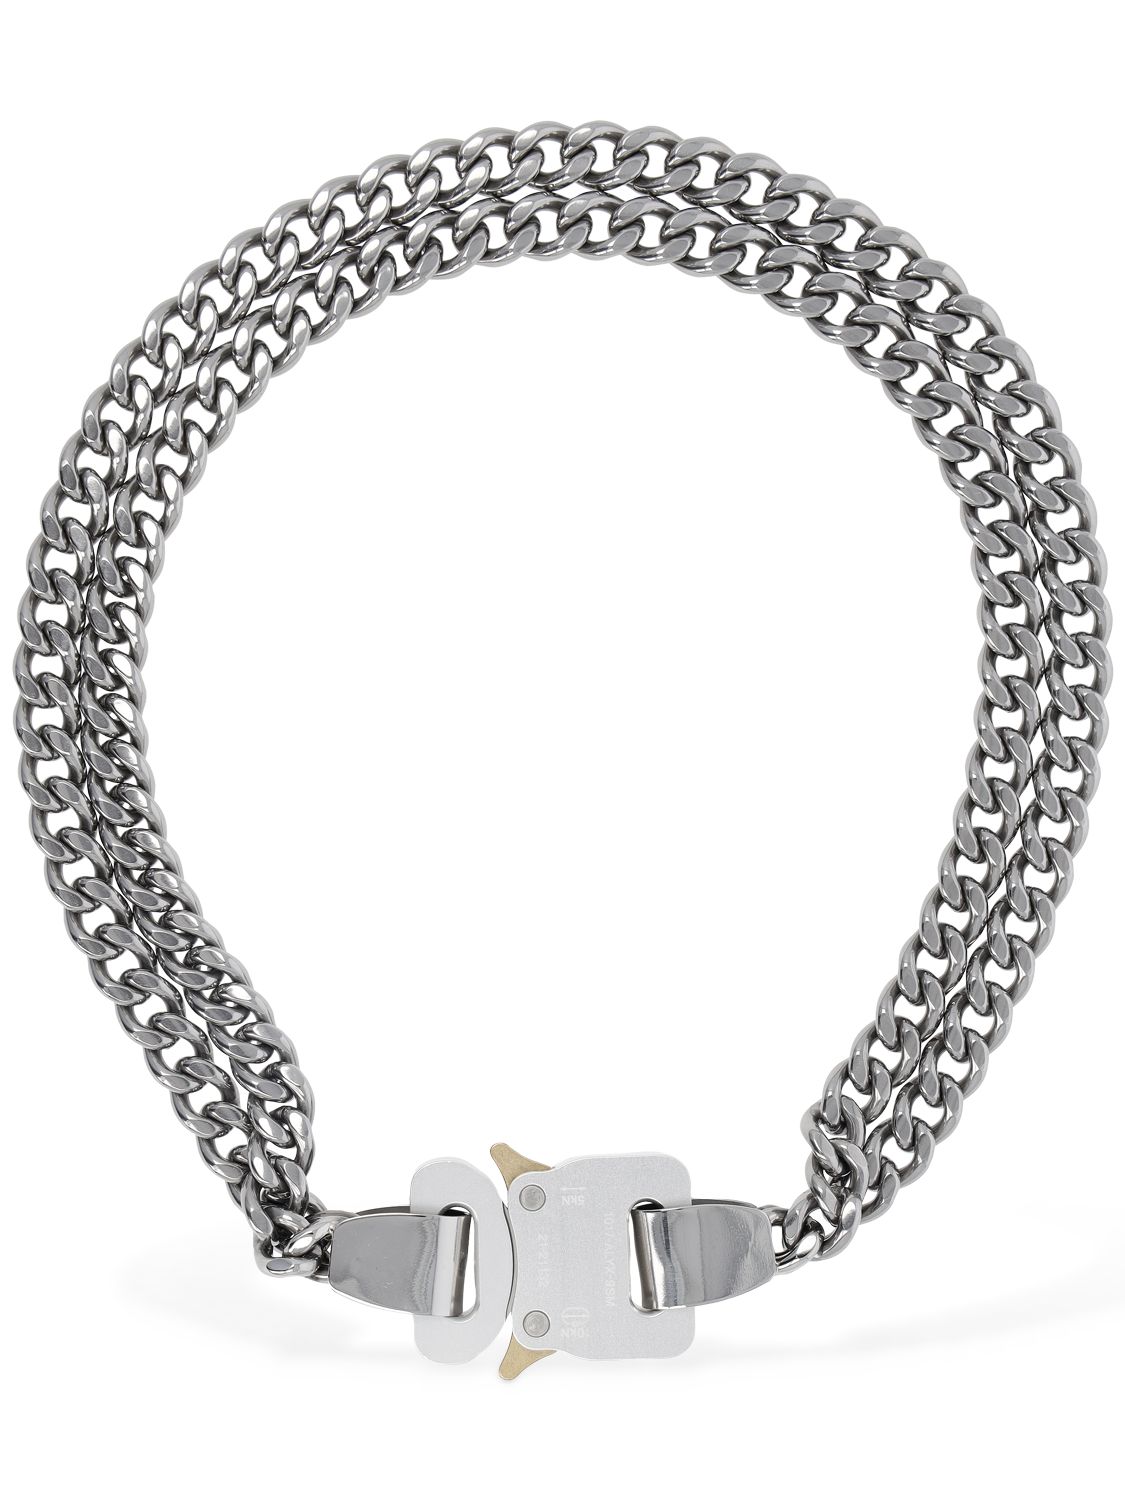 2x Chain Buckle Necklace